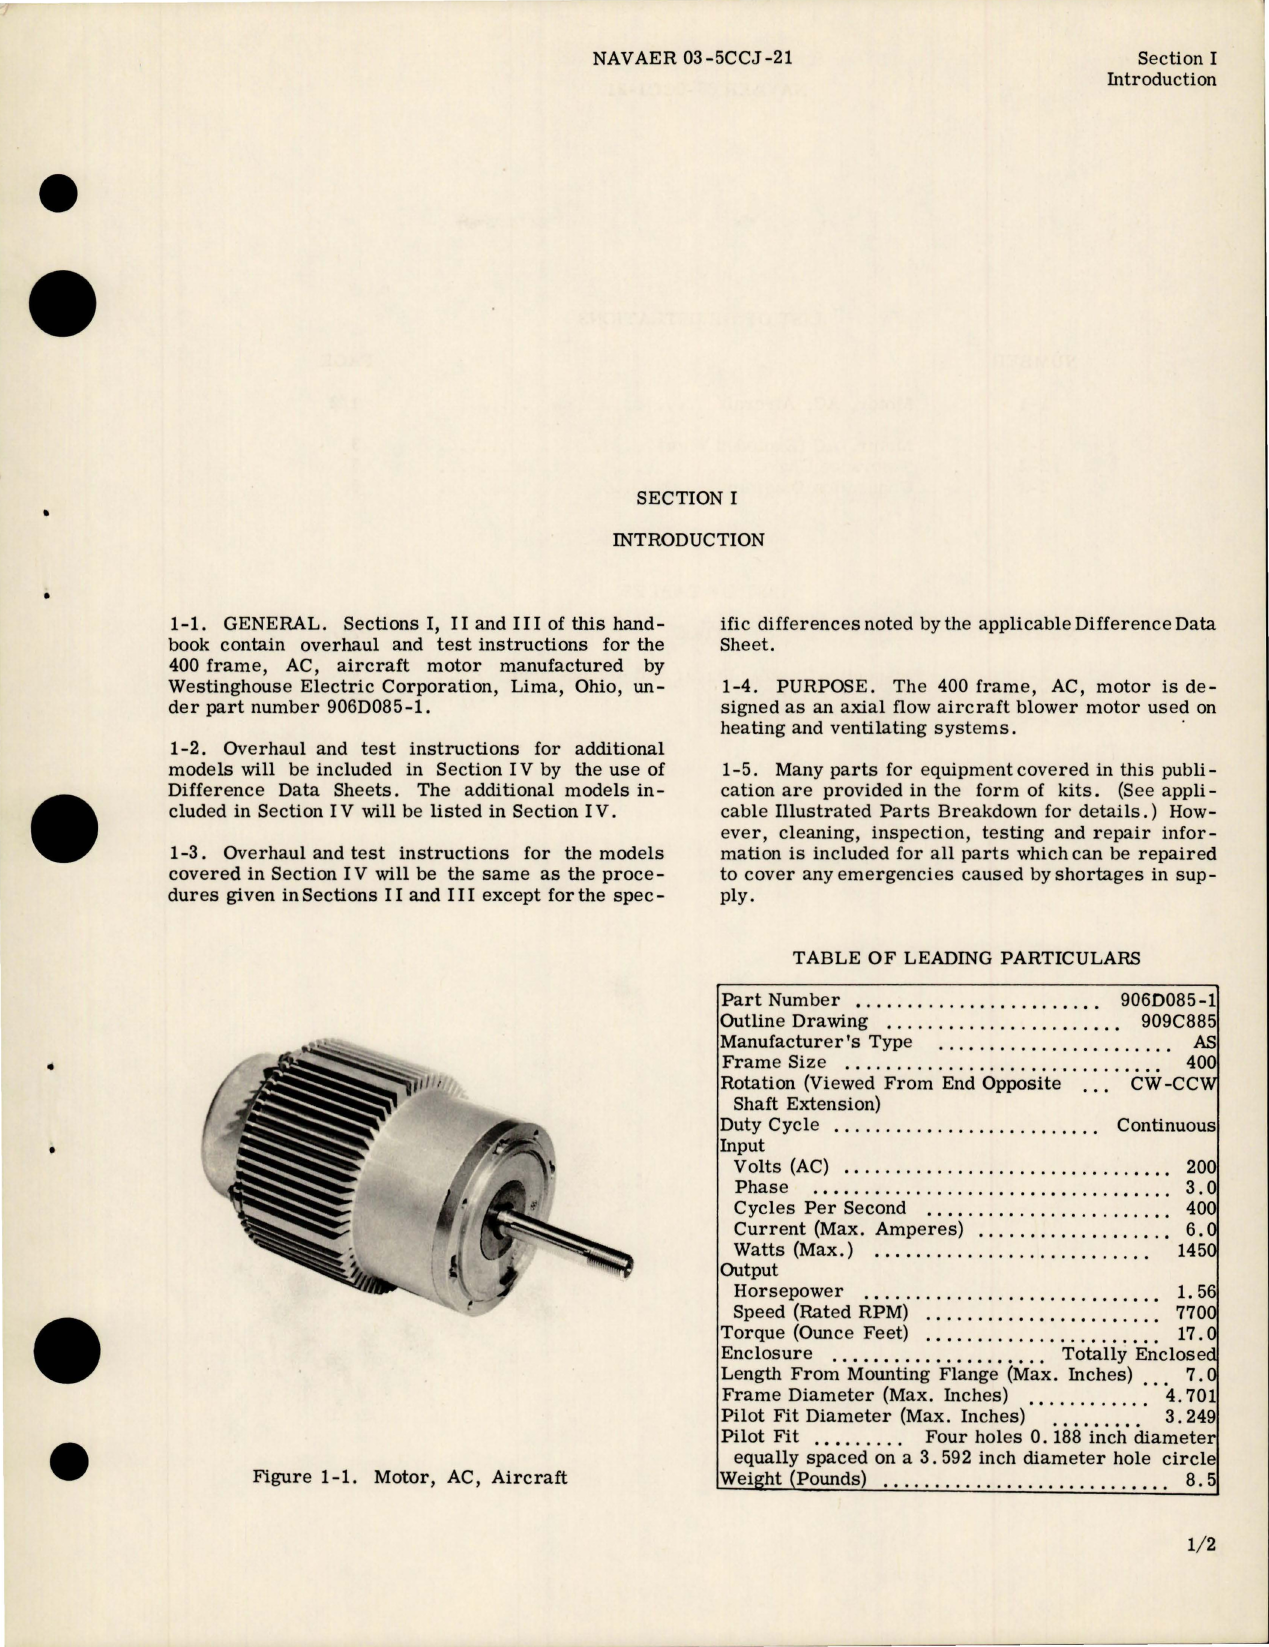 Sample page 5 from AirCorps Library document: Overhaul Instructions for AC Motor - Parts 906D085-1, 906D086-1, and 906D087-1